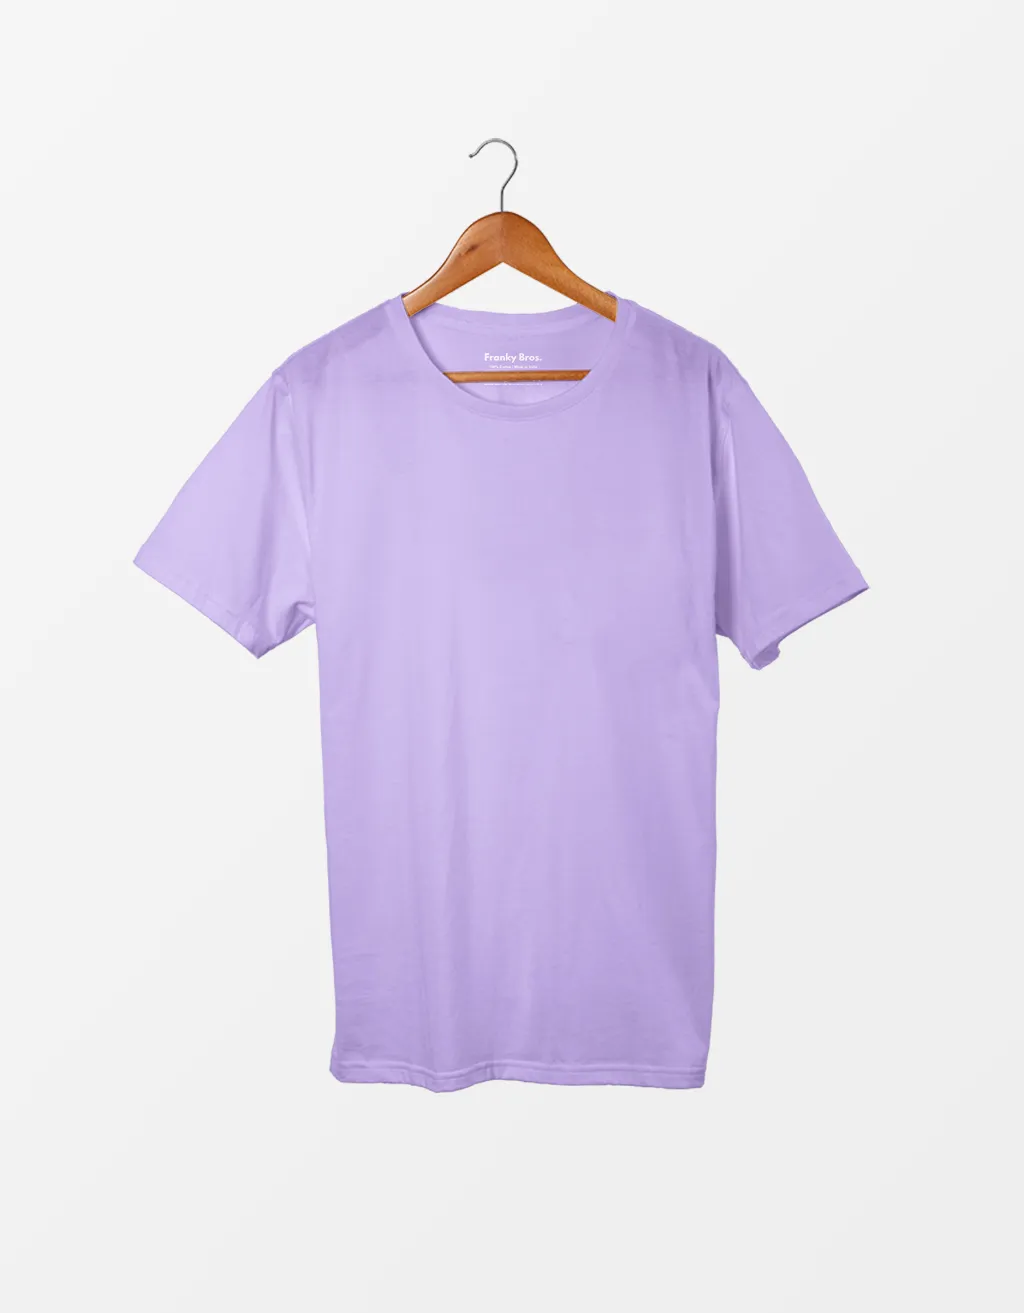 lavender t shirt womens buy online india